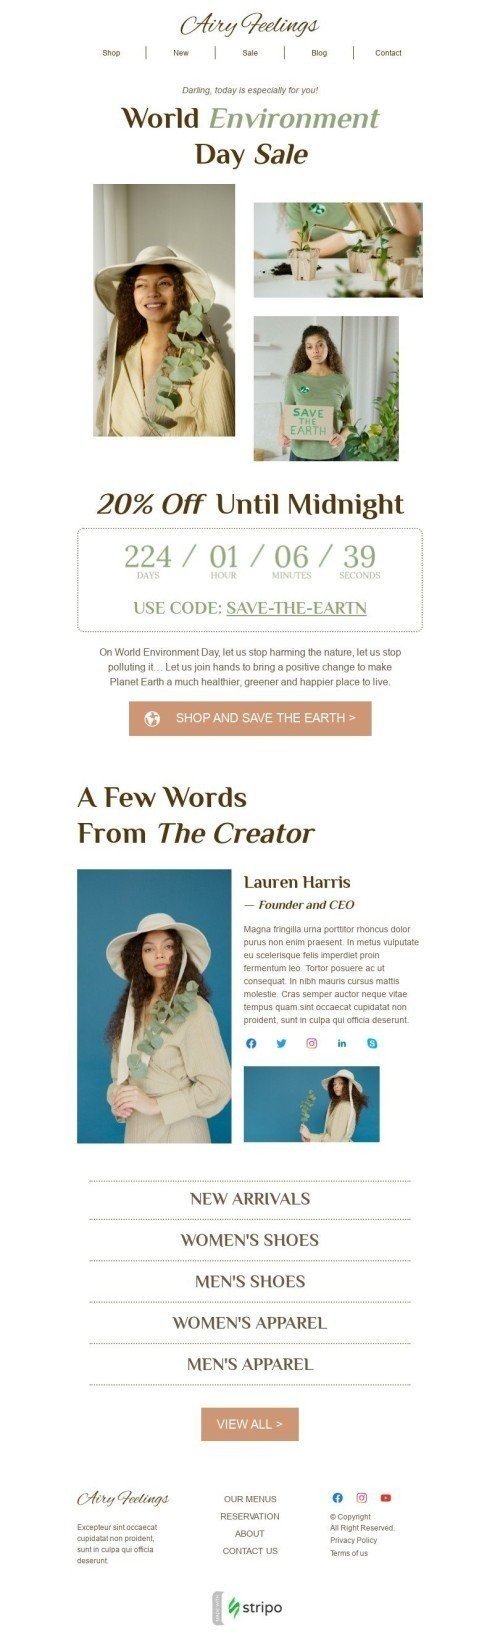 World Environment Day Email Template "Stop harming nature" for Fashion industry desktop view